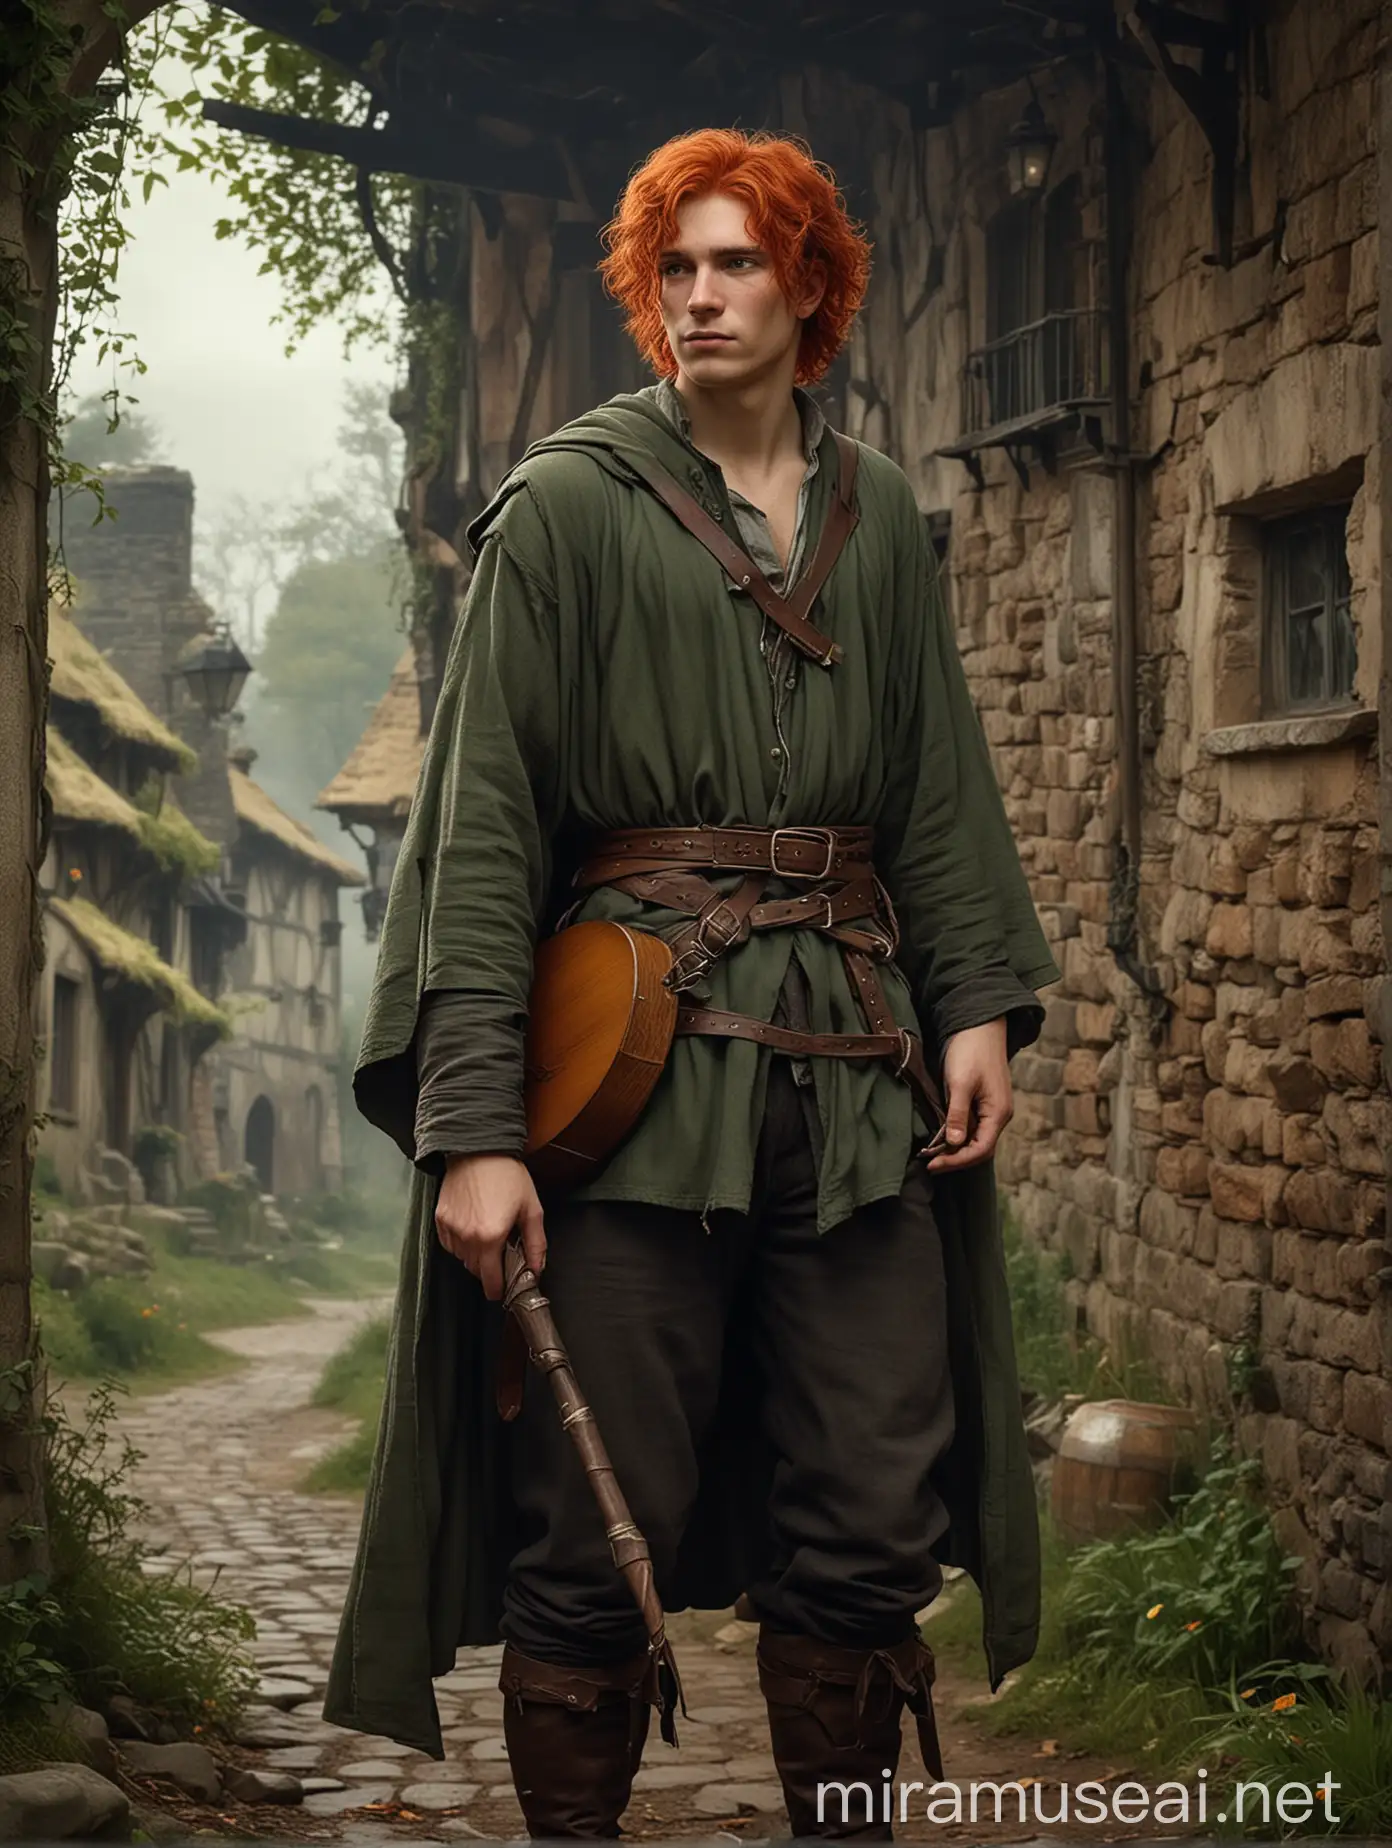 Kvothe the FlameHaired Protagonist in Rustic Ambiance